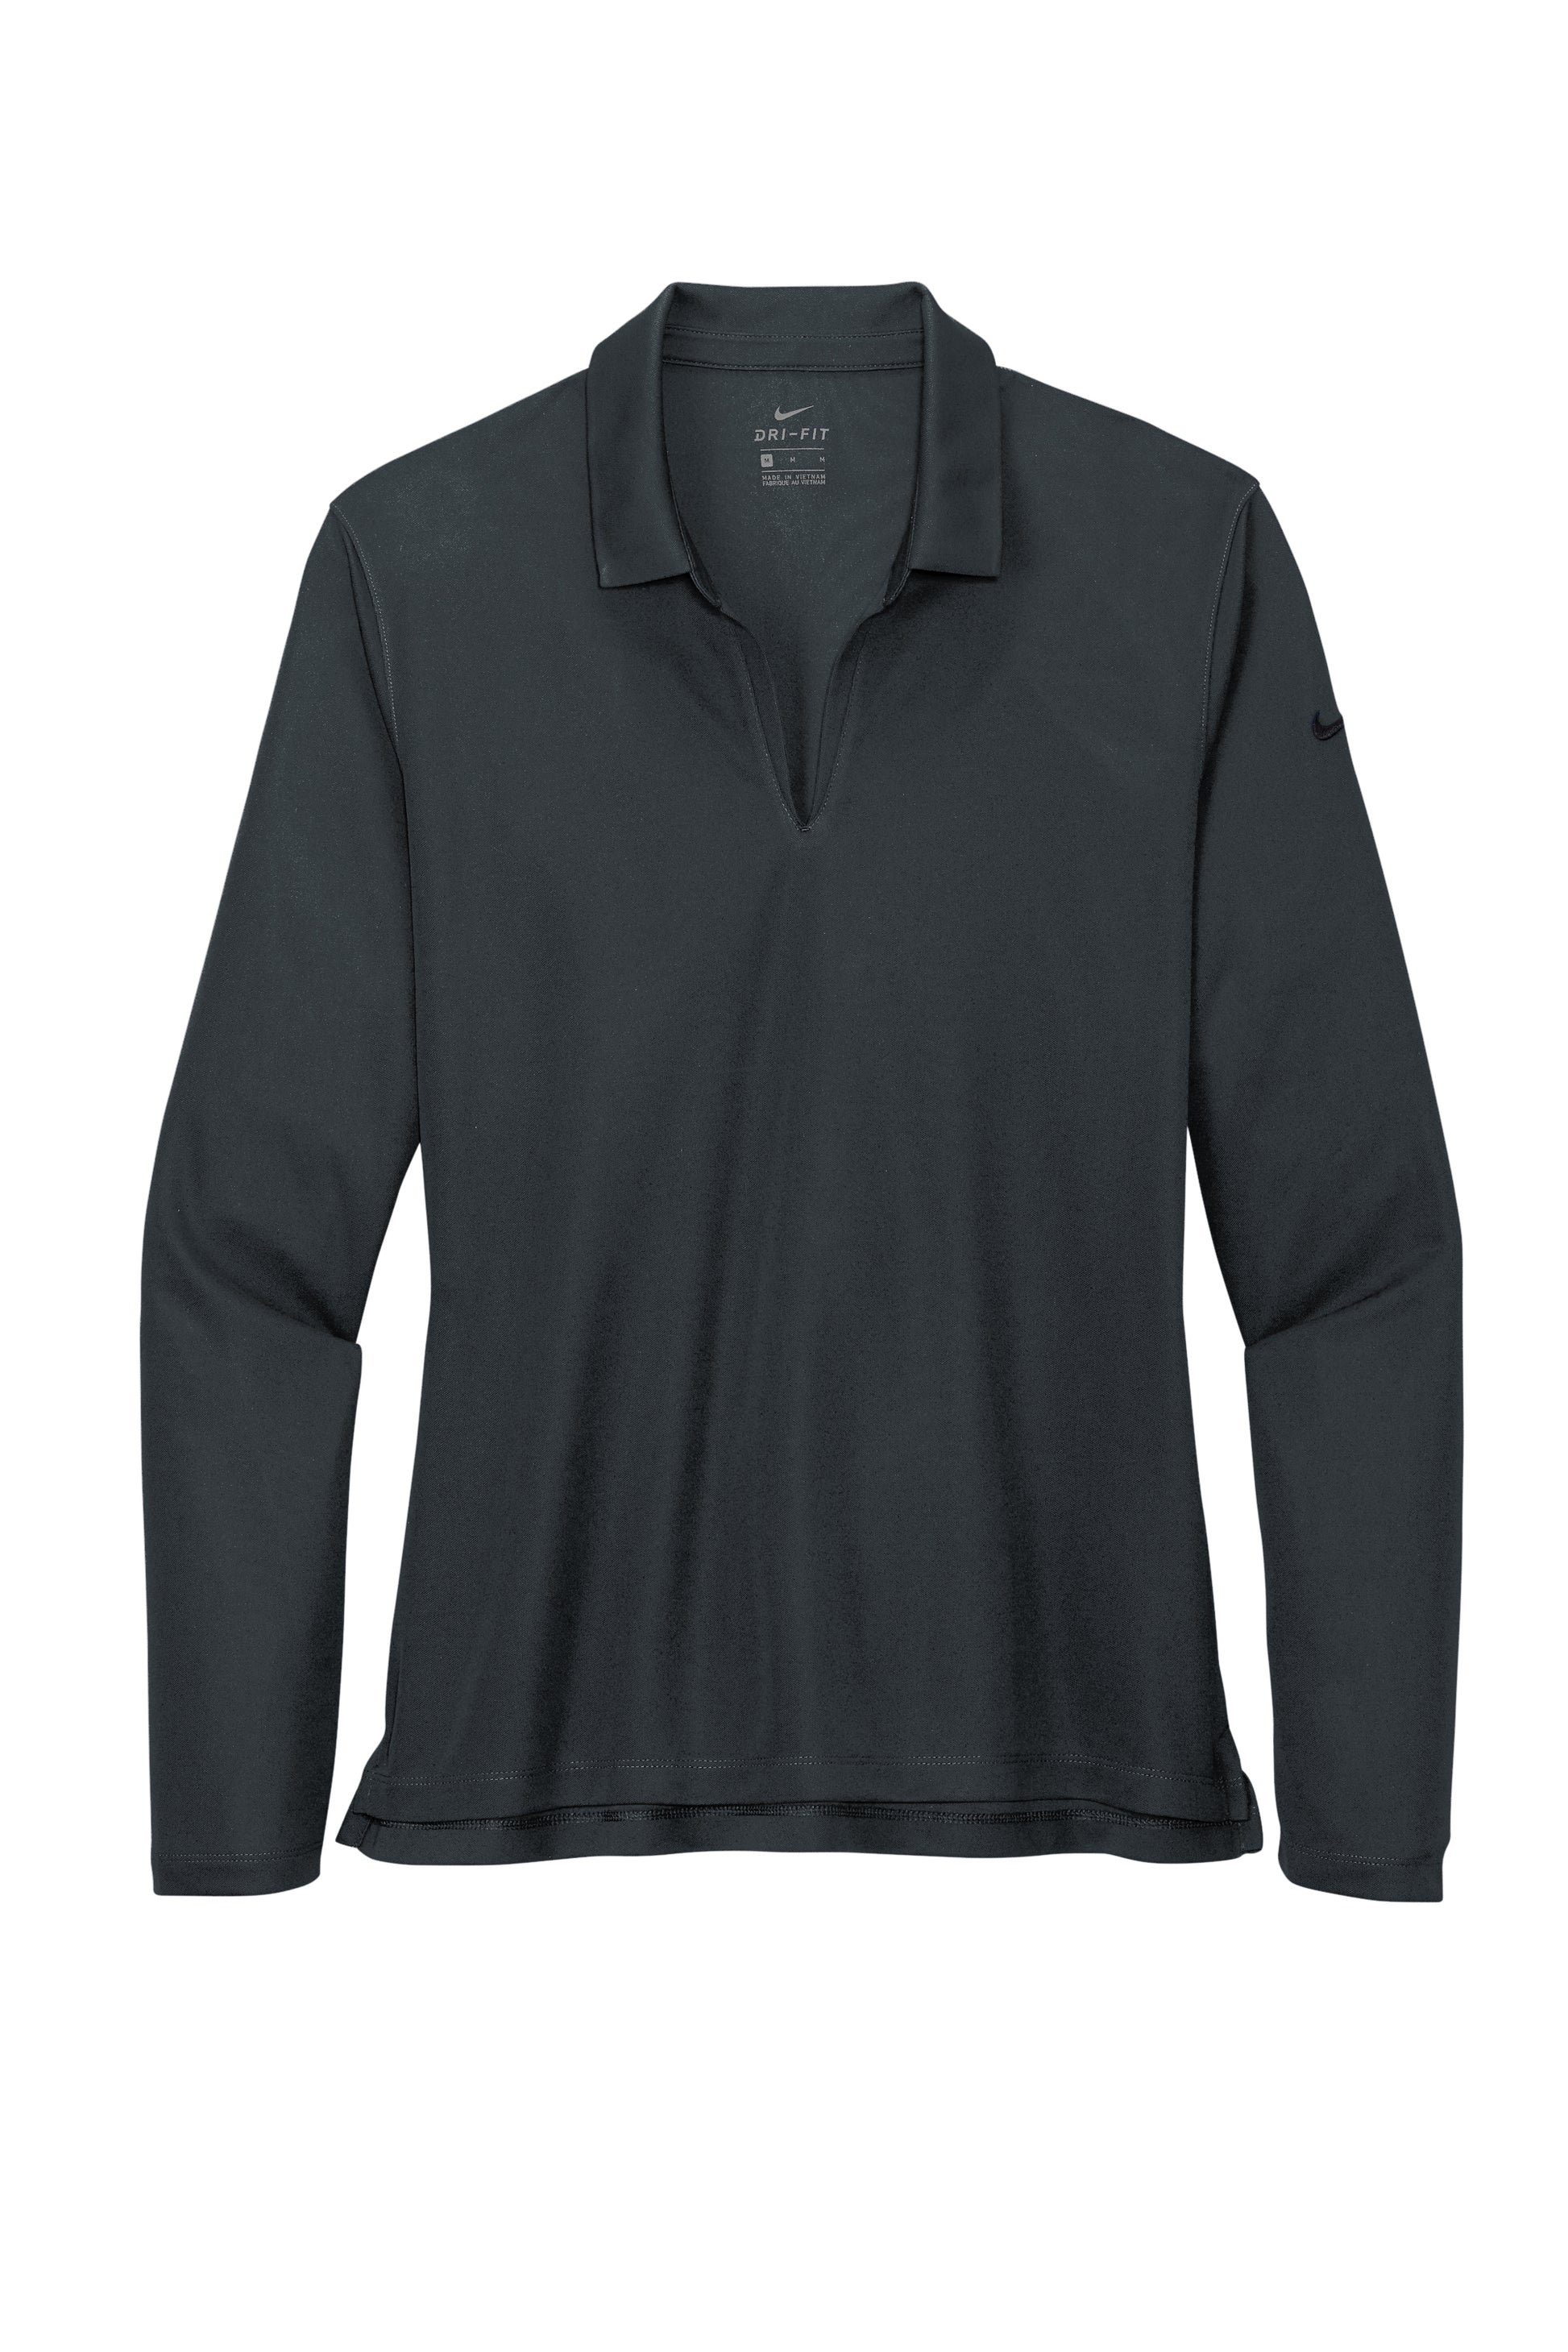 nike womens dri-fit pique long sleeve polo anthracite grey